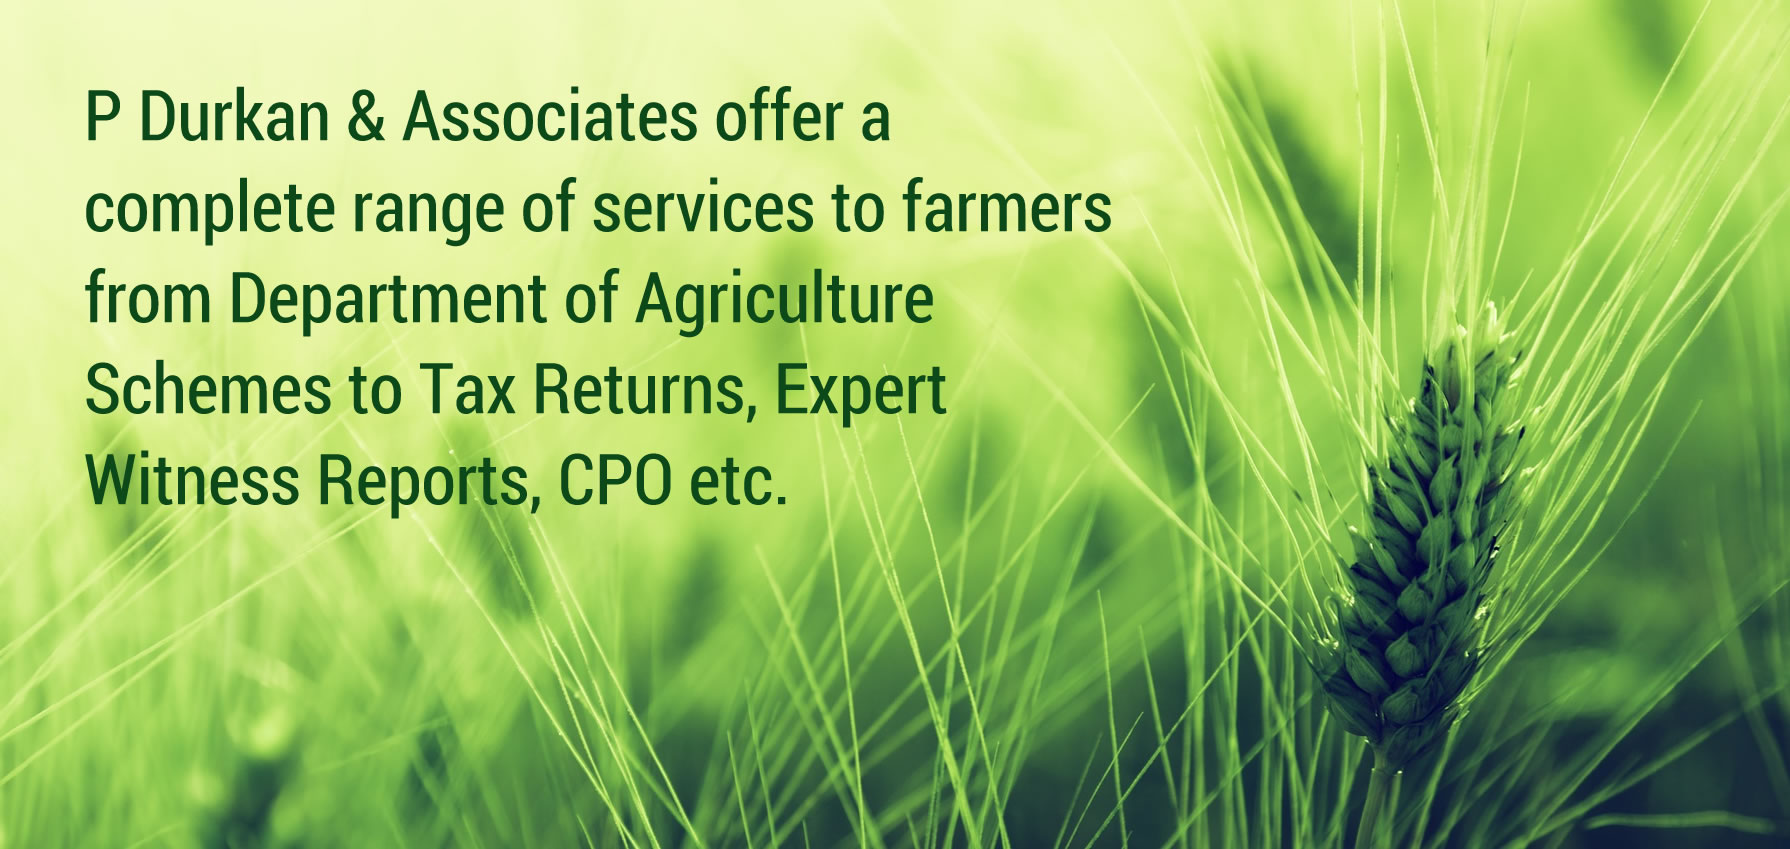 P Durkan & Associates offer a complete range of services to farmers from Department of Agriculture Schemes to Tax Returns, Expert Witness Reports, CPO etc.